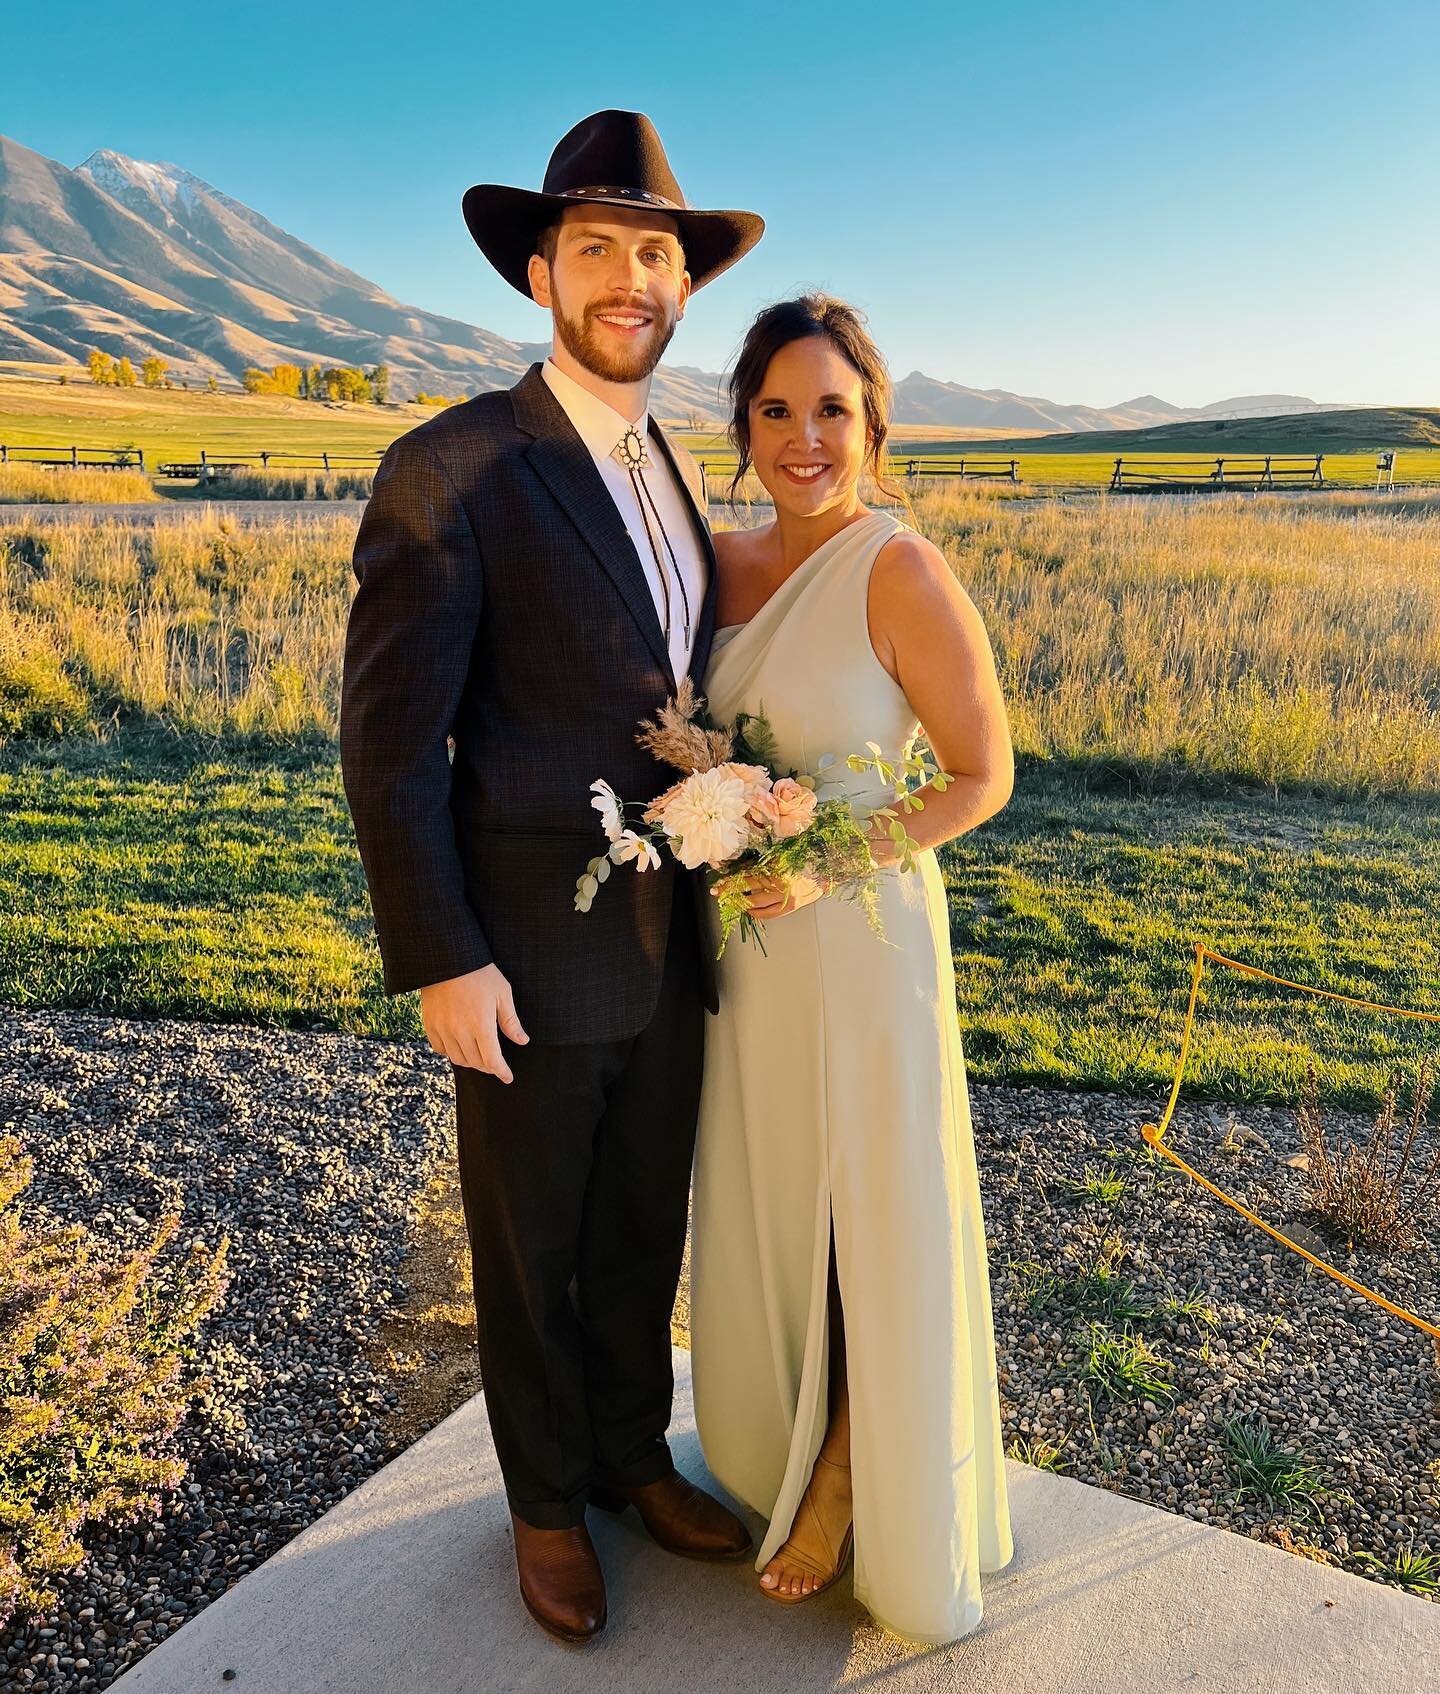 A magical weekend in Bozeman, Montana celebrating Ali &amp; Sean McGuire! ✨🥂 We love you both and baby Elayna so much!